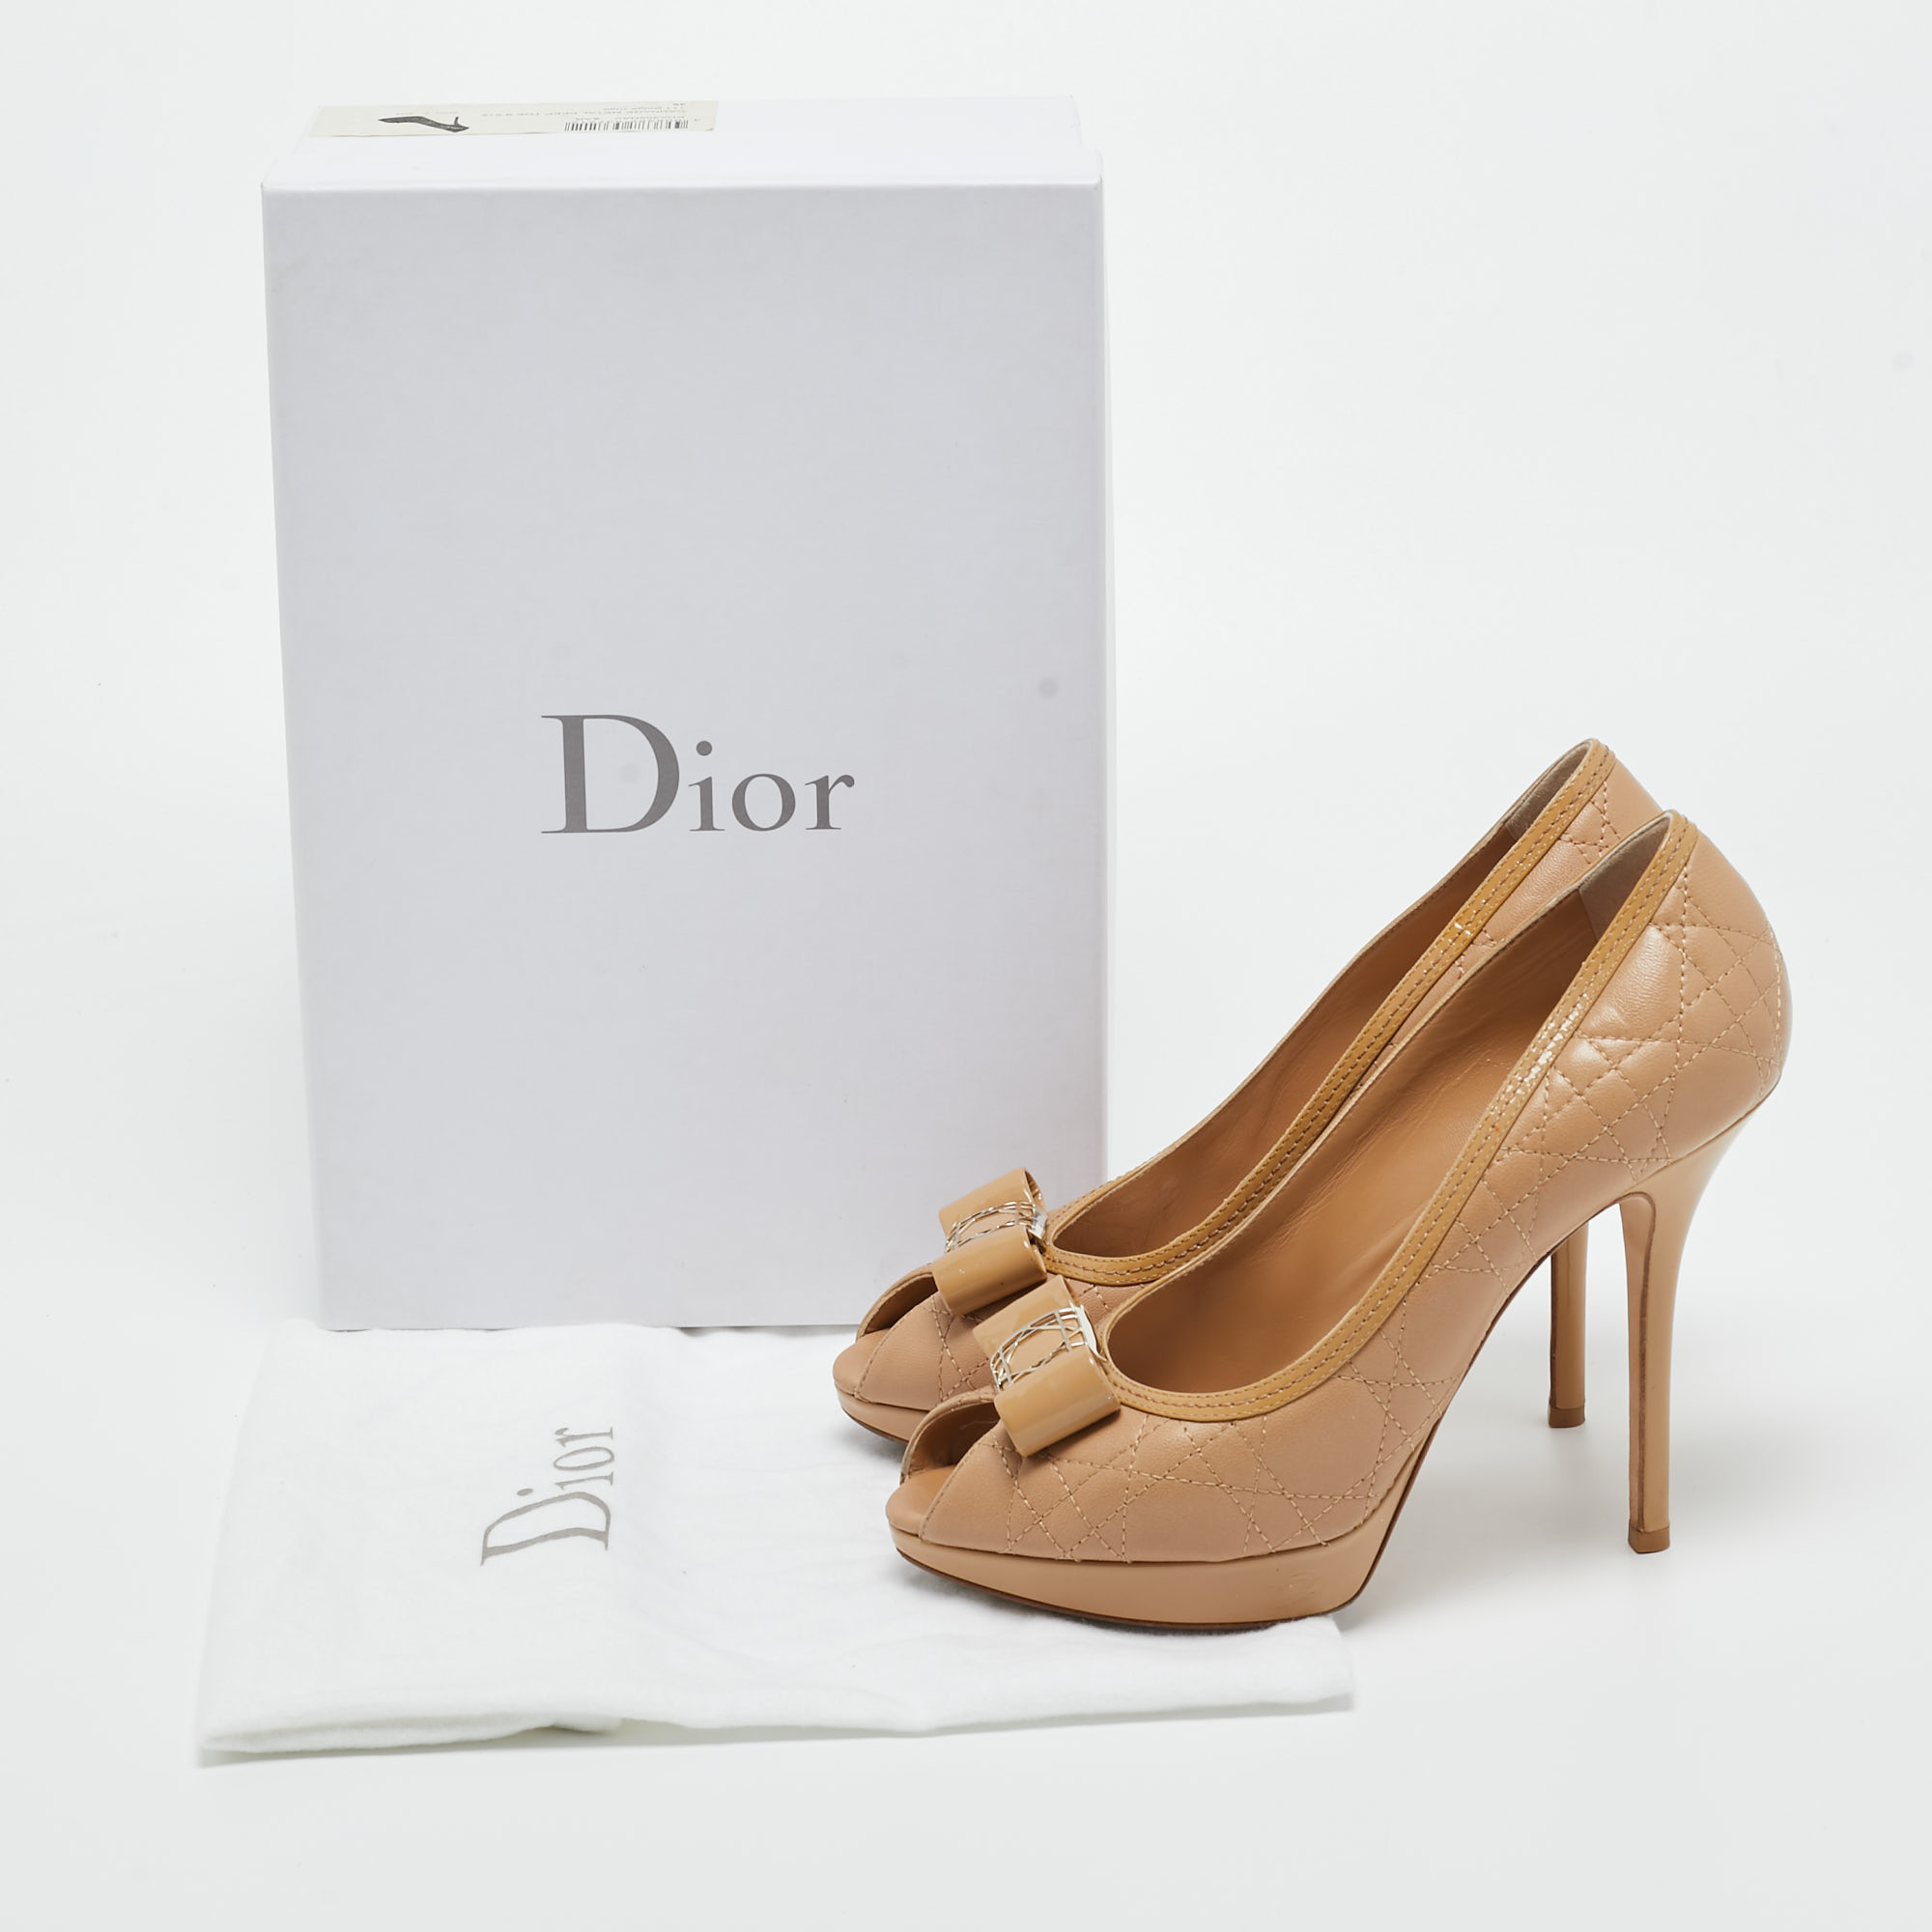 Dior Beige Patent Leather And Leather Peep Toe Pumps Size 39